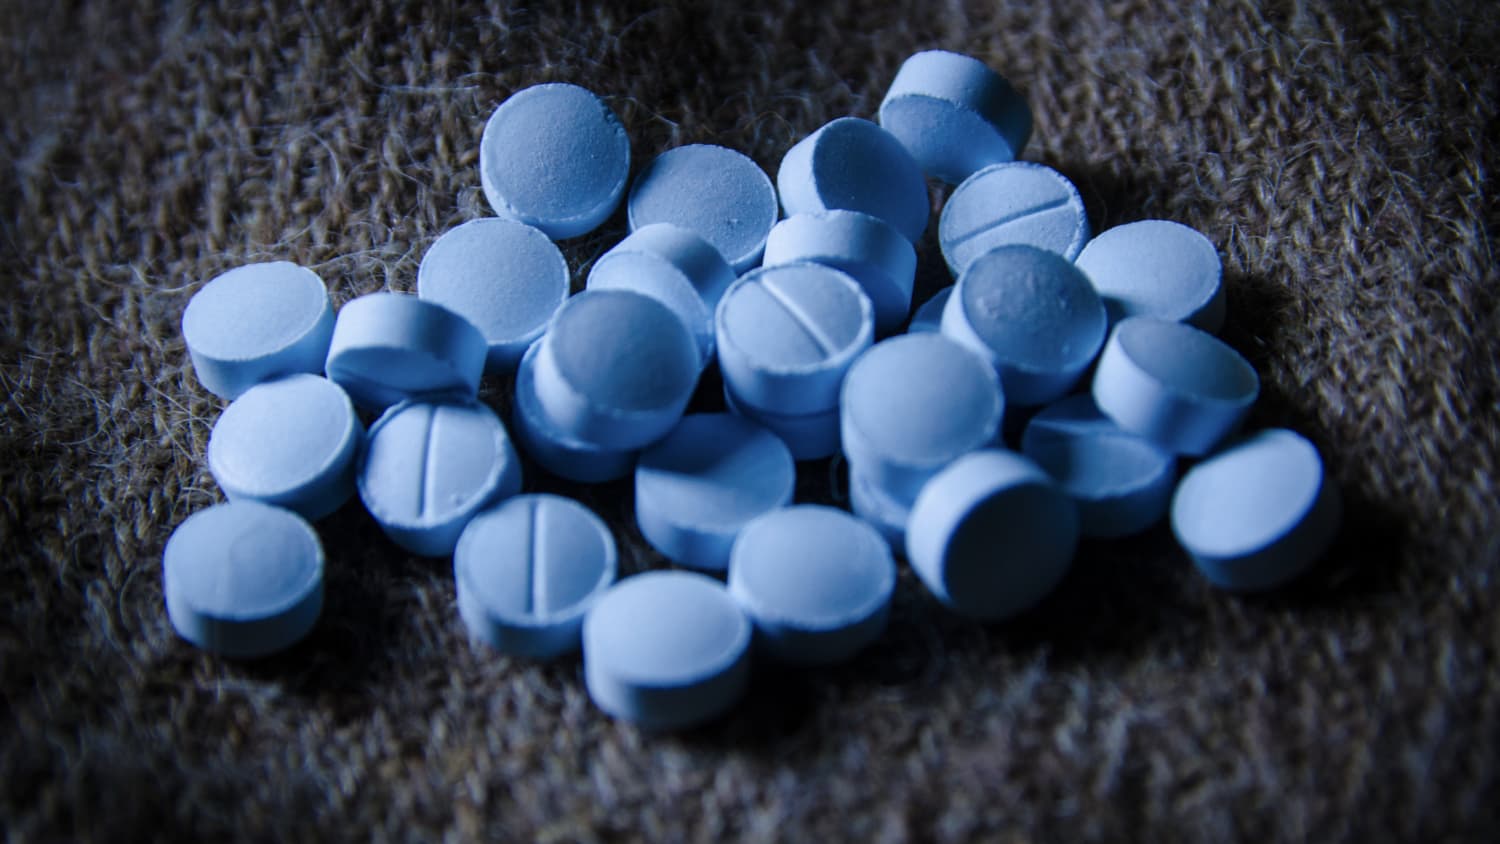 blue pills, diazepam, unknown brand, part of the growing Benzodiazepine crisis